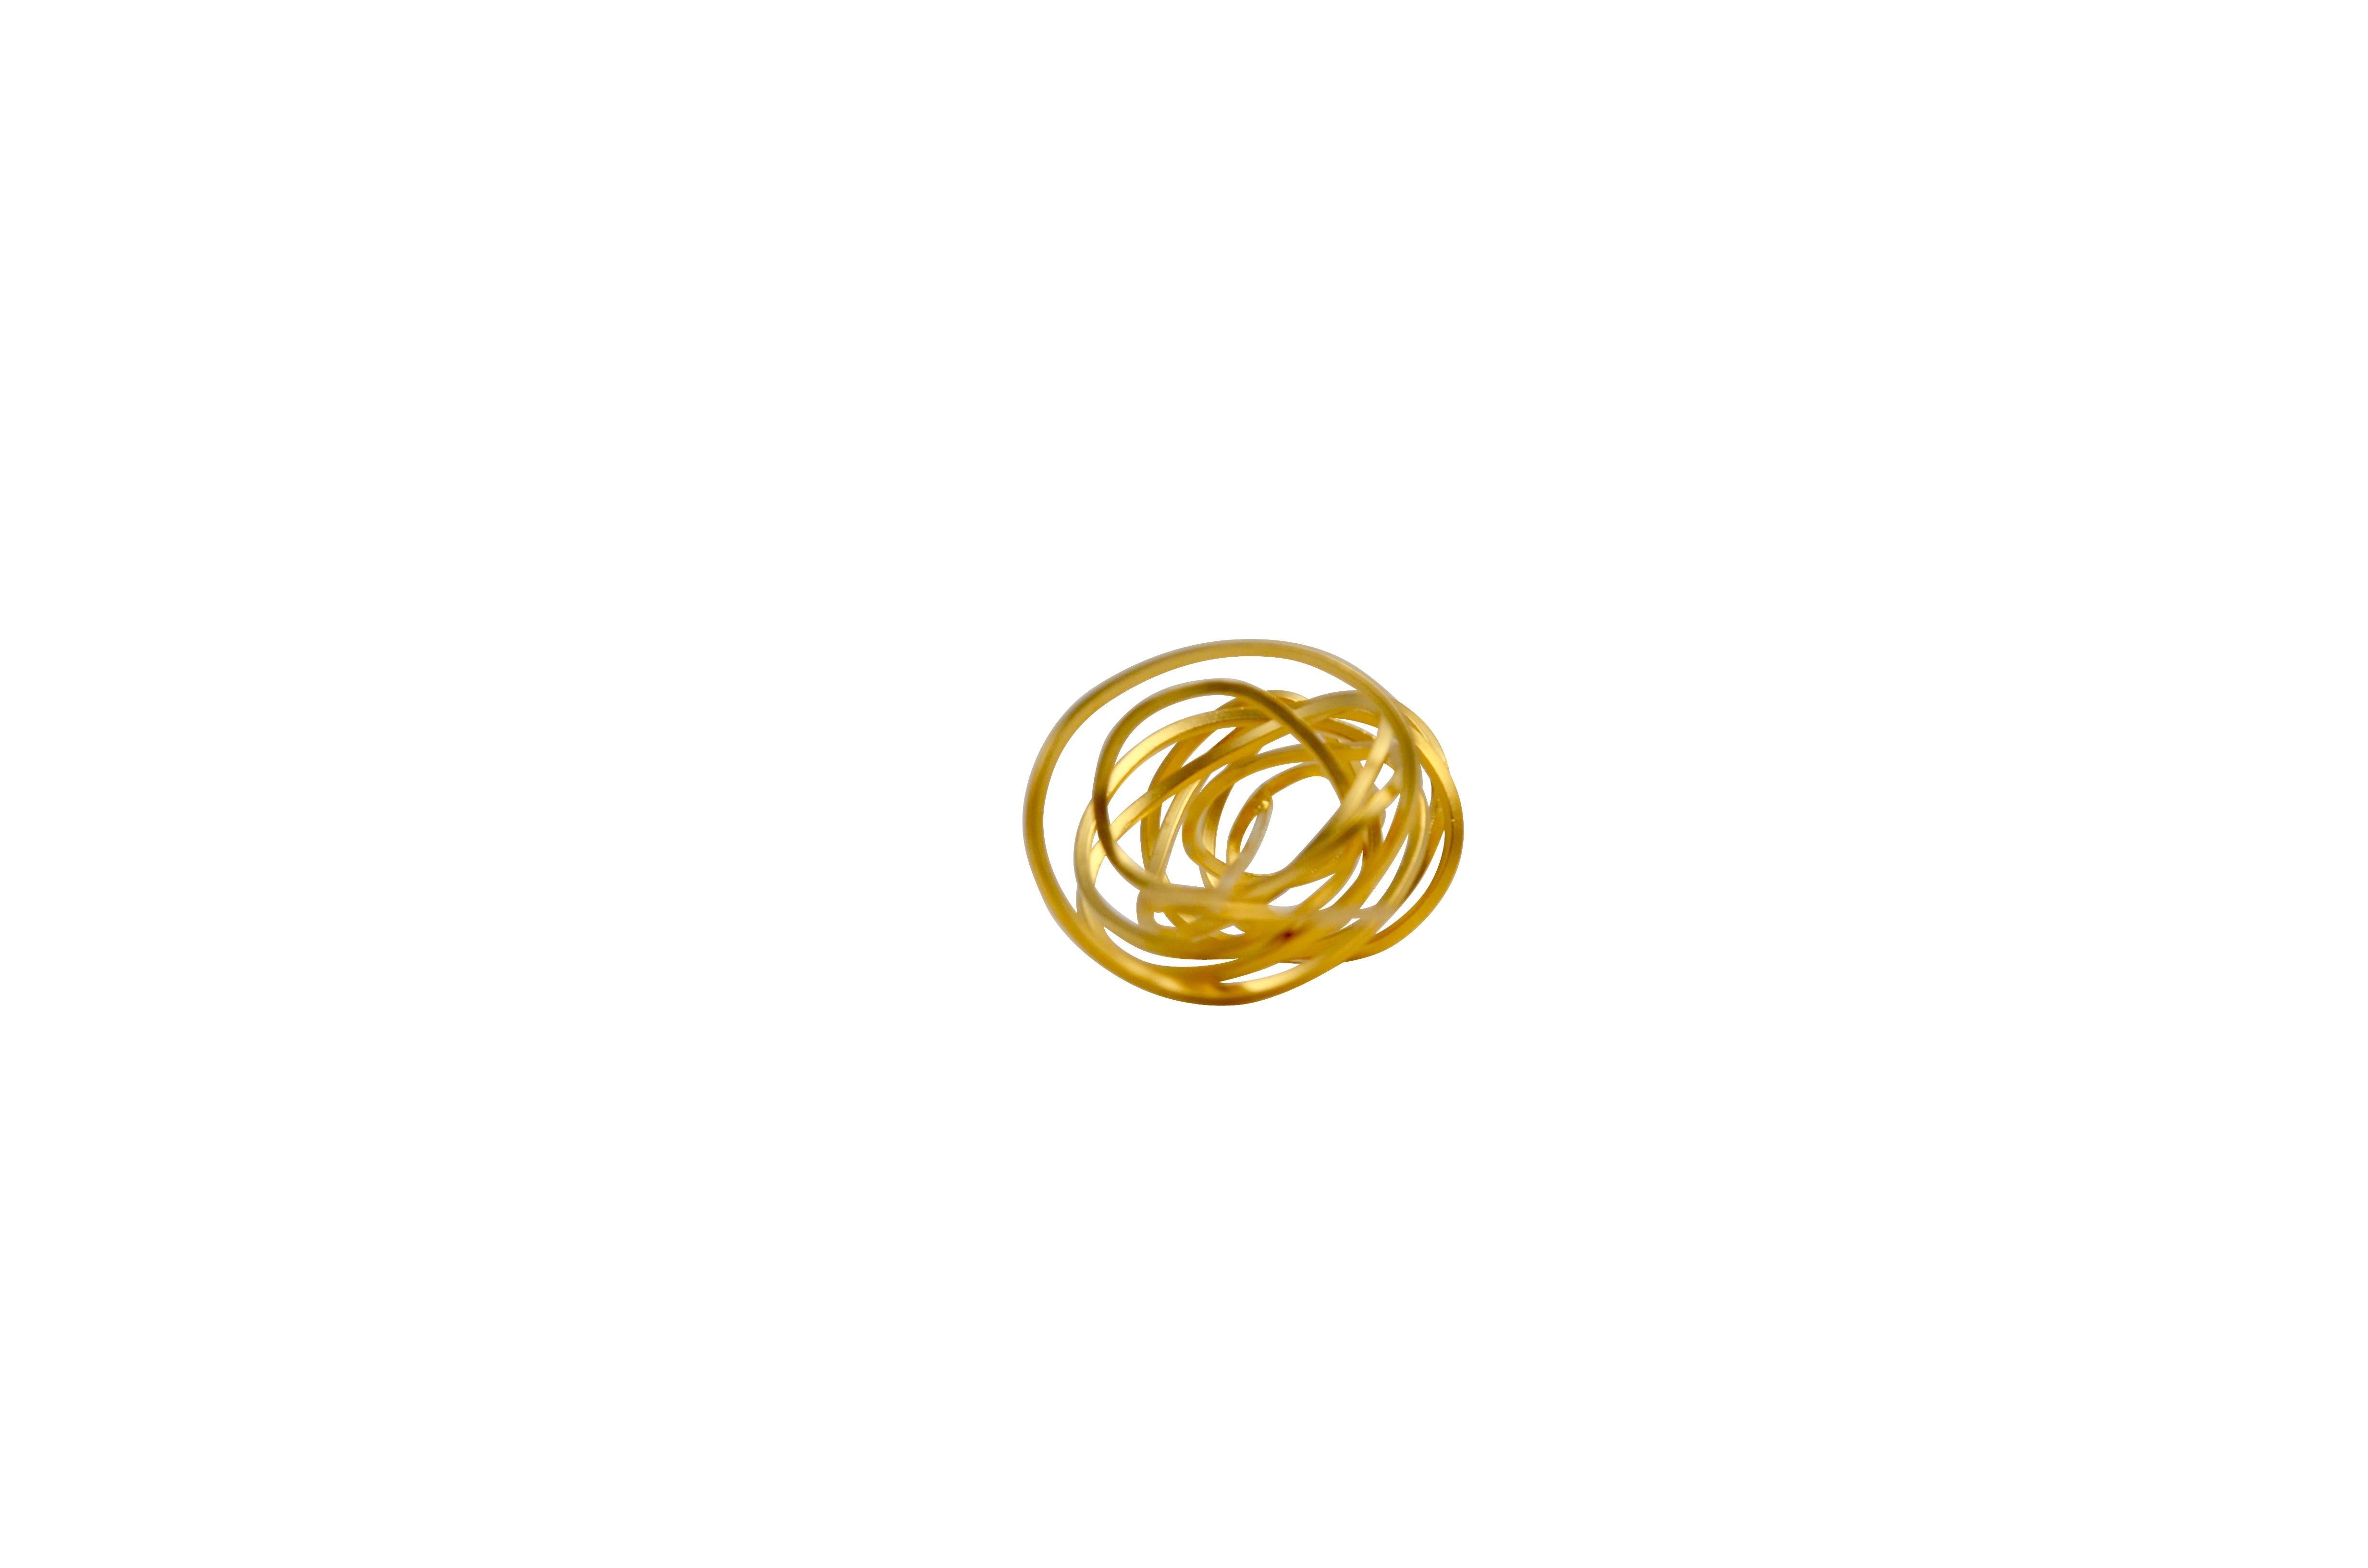 Contemporary 18 karat Gold Pendant

This piece of fine jewellery can be customized, using  gold, silver and in different sizes. 
Please get in touch with us to discuss further details. Available hanging on a chain or a rope.

Minimalist, modern,